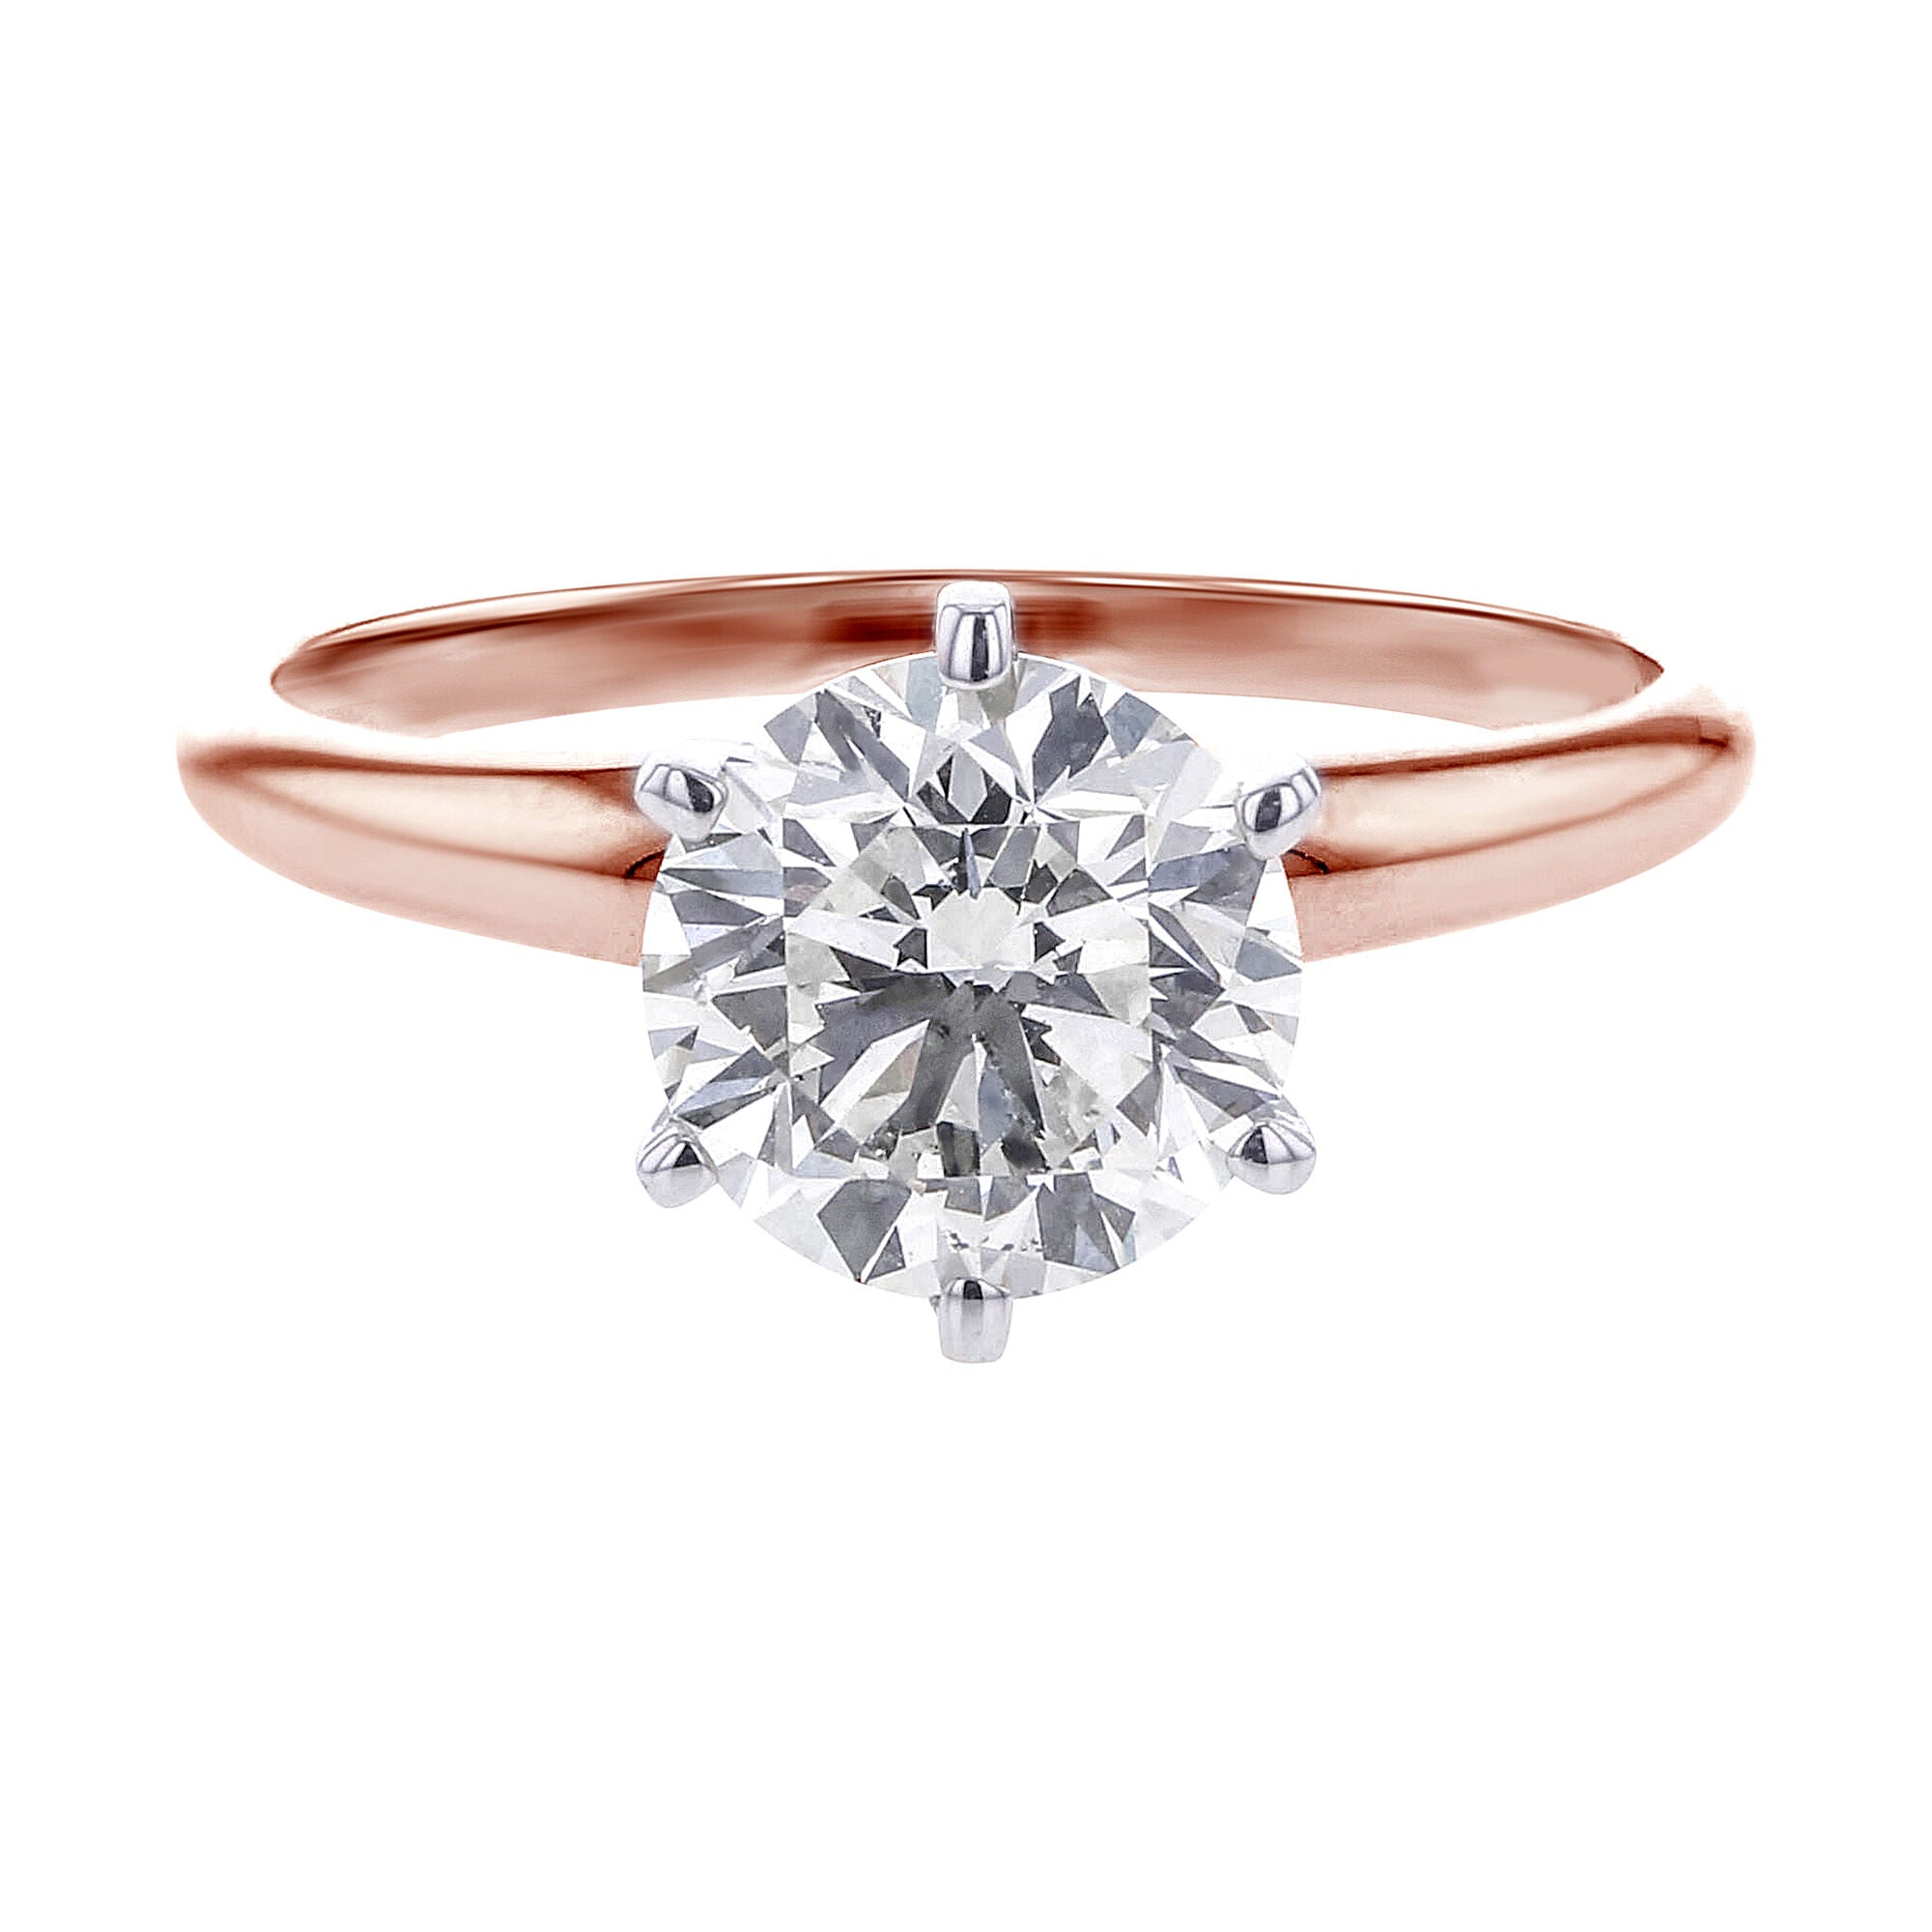 Christa Ready For Love Diamond Engagement Ring 2CT